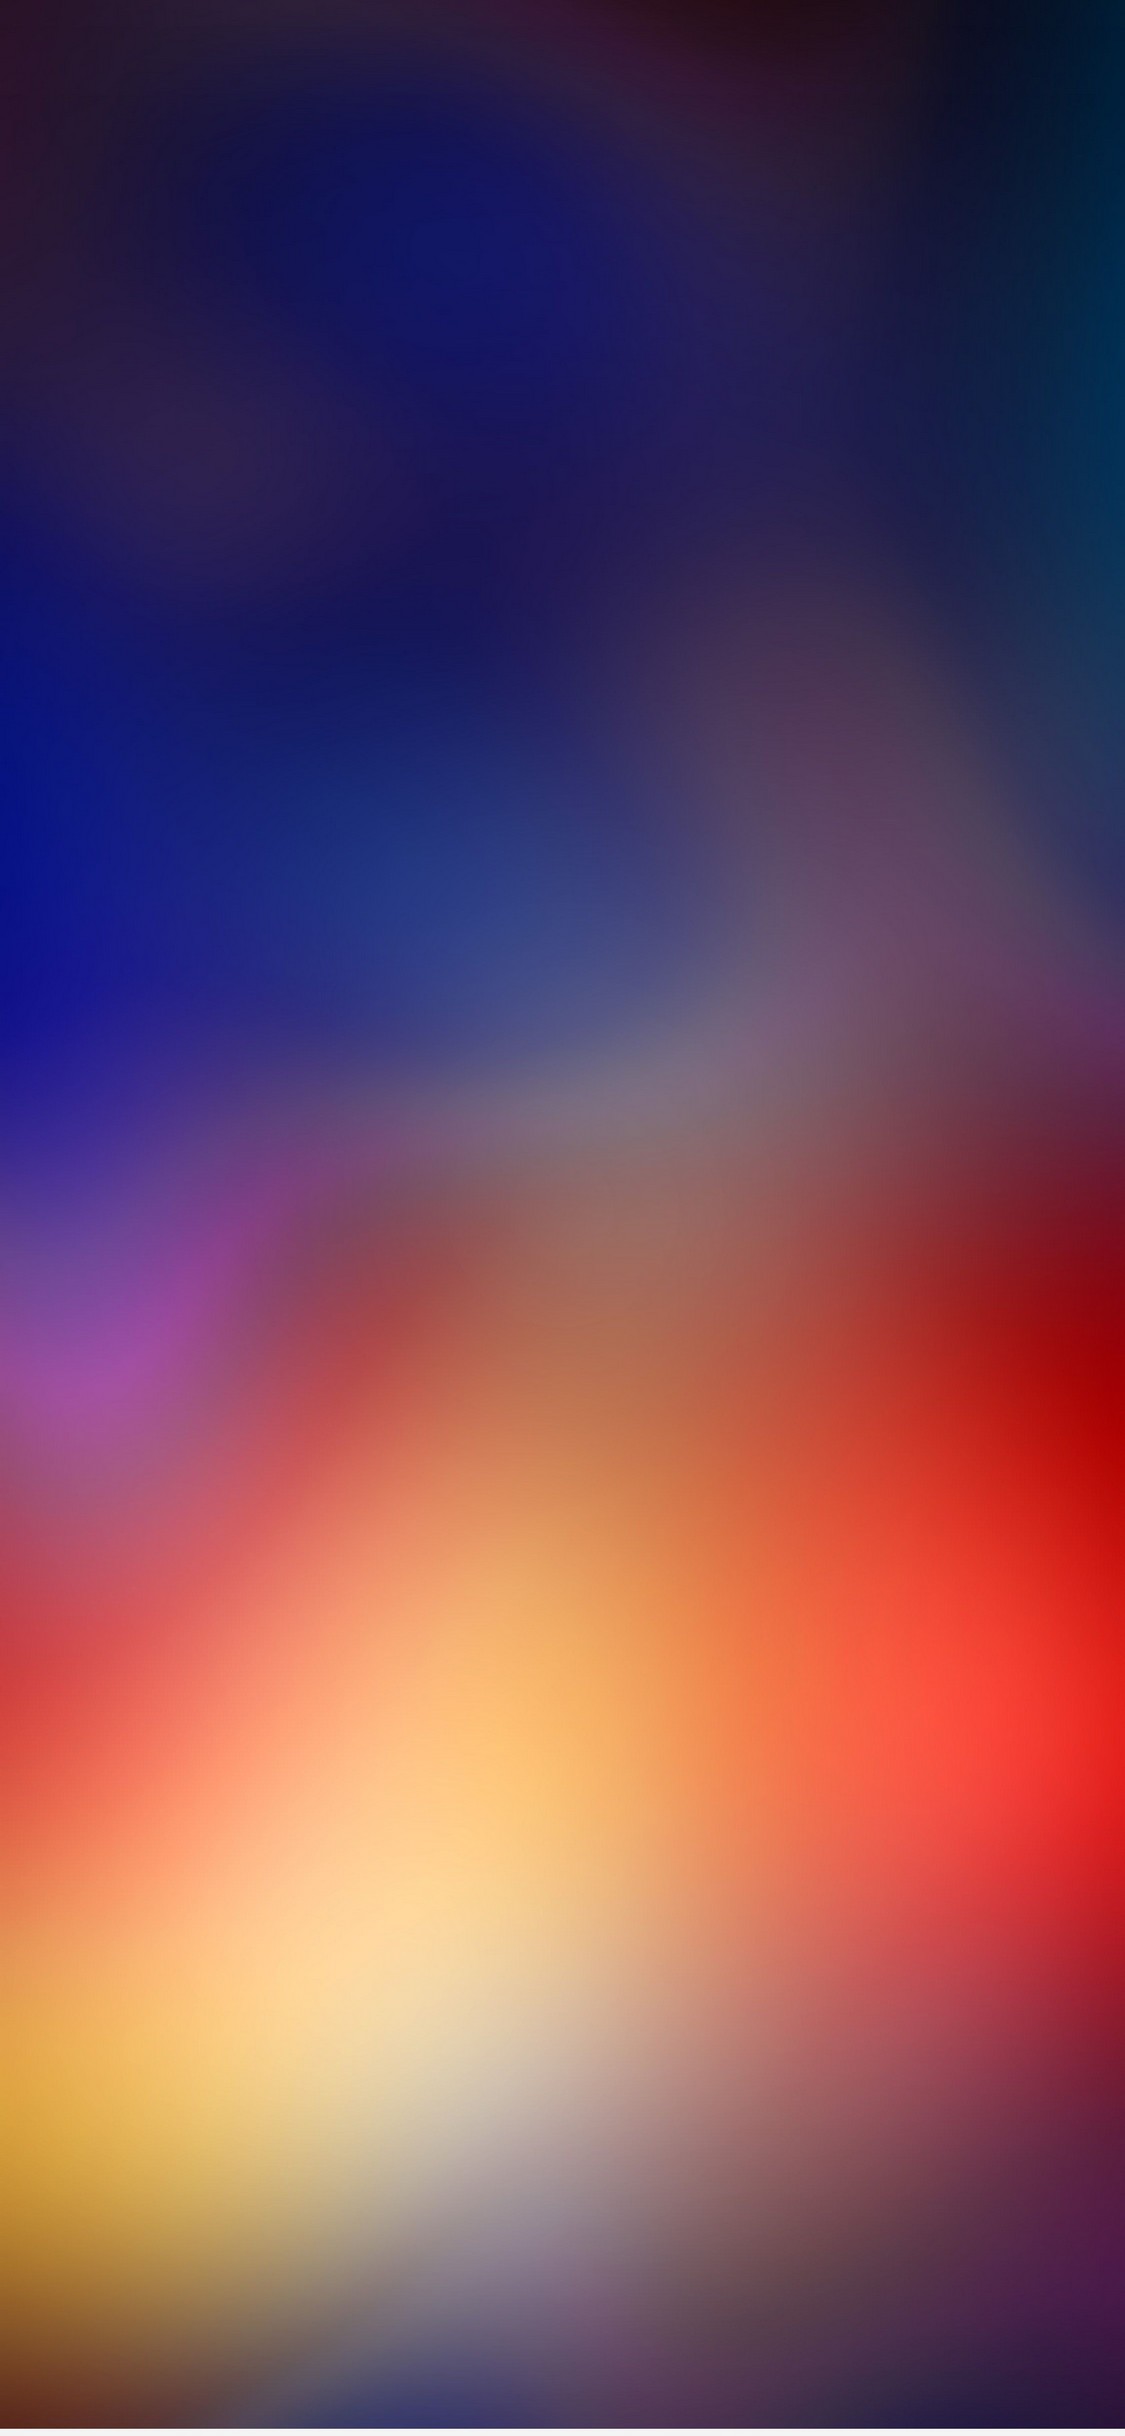 iPhone X Lock Screen Wallpaper With high-resolution 1125X2436 pixel. You can set as wallpaper for Apple iPhone X, XS Max, XR, 8, 7, 6, SE, iPad. Enjoy and share your favorite HD wallpapers and background images